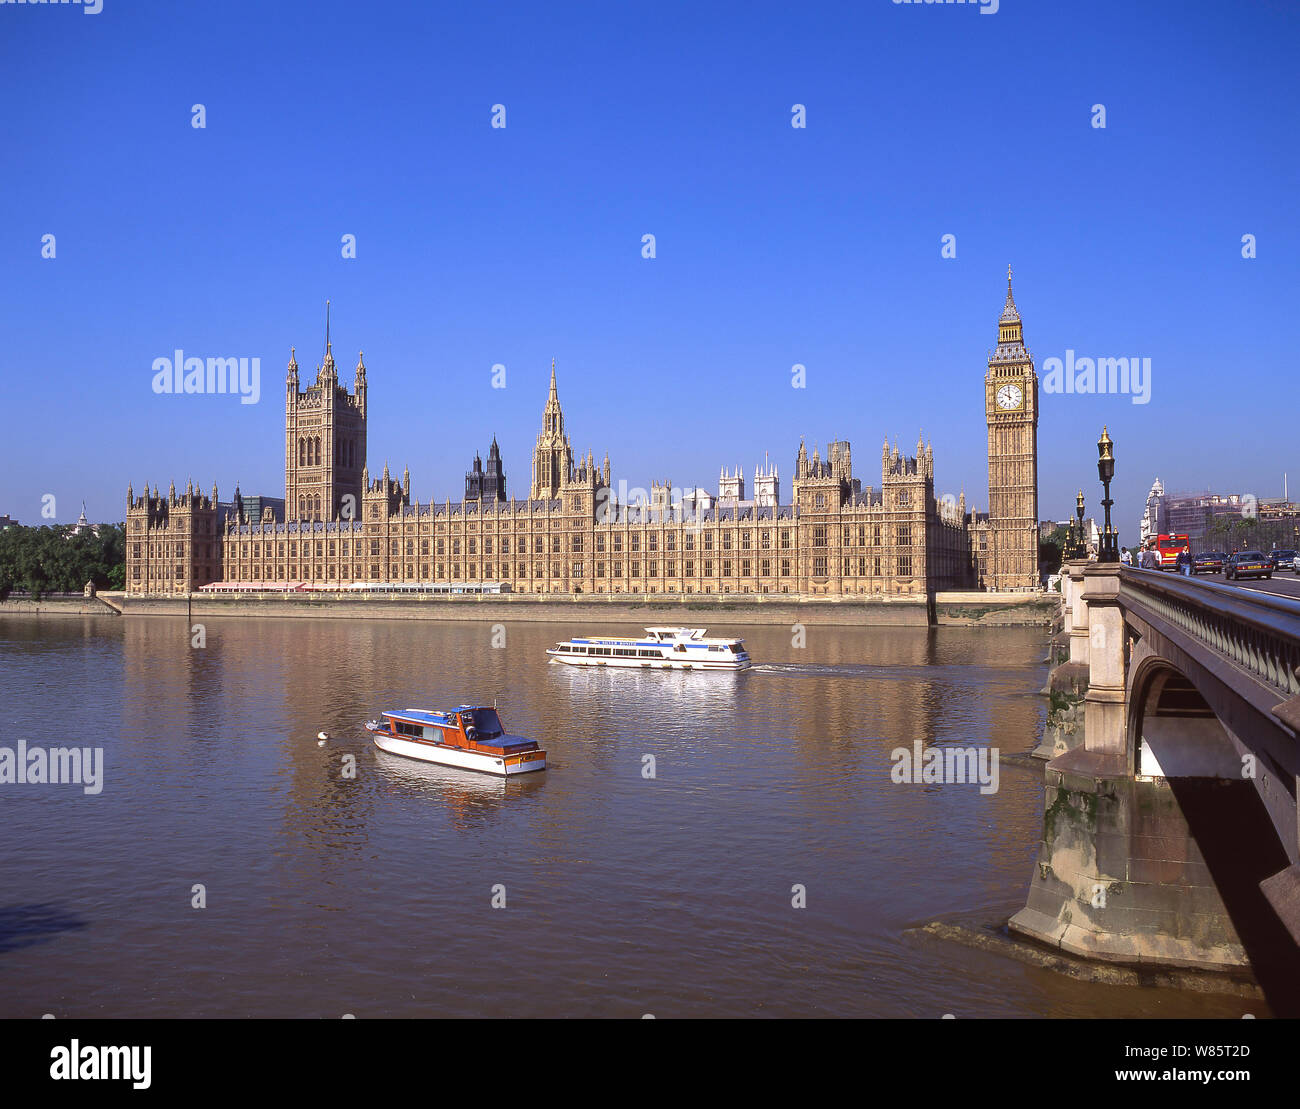 The Palace of Westminster (Houses of Parliament) across River Thames, City of Westminster, London, England, United Kingdom Stock Photo